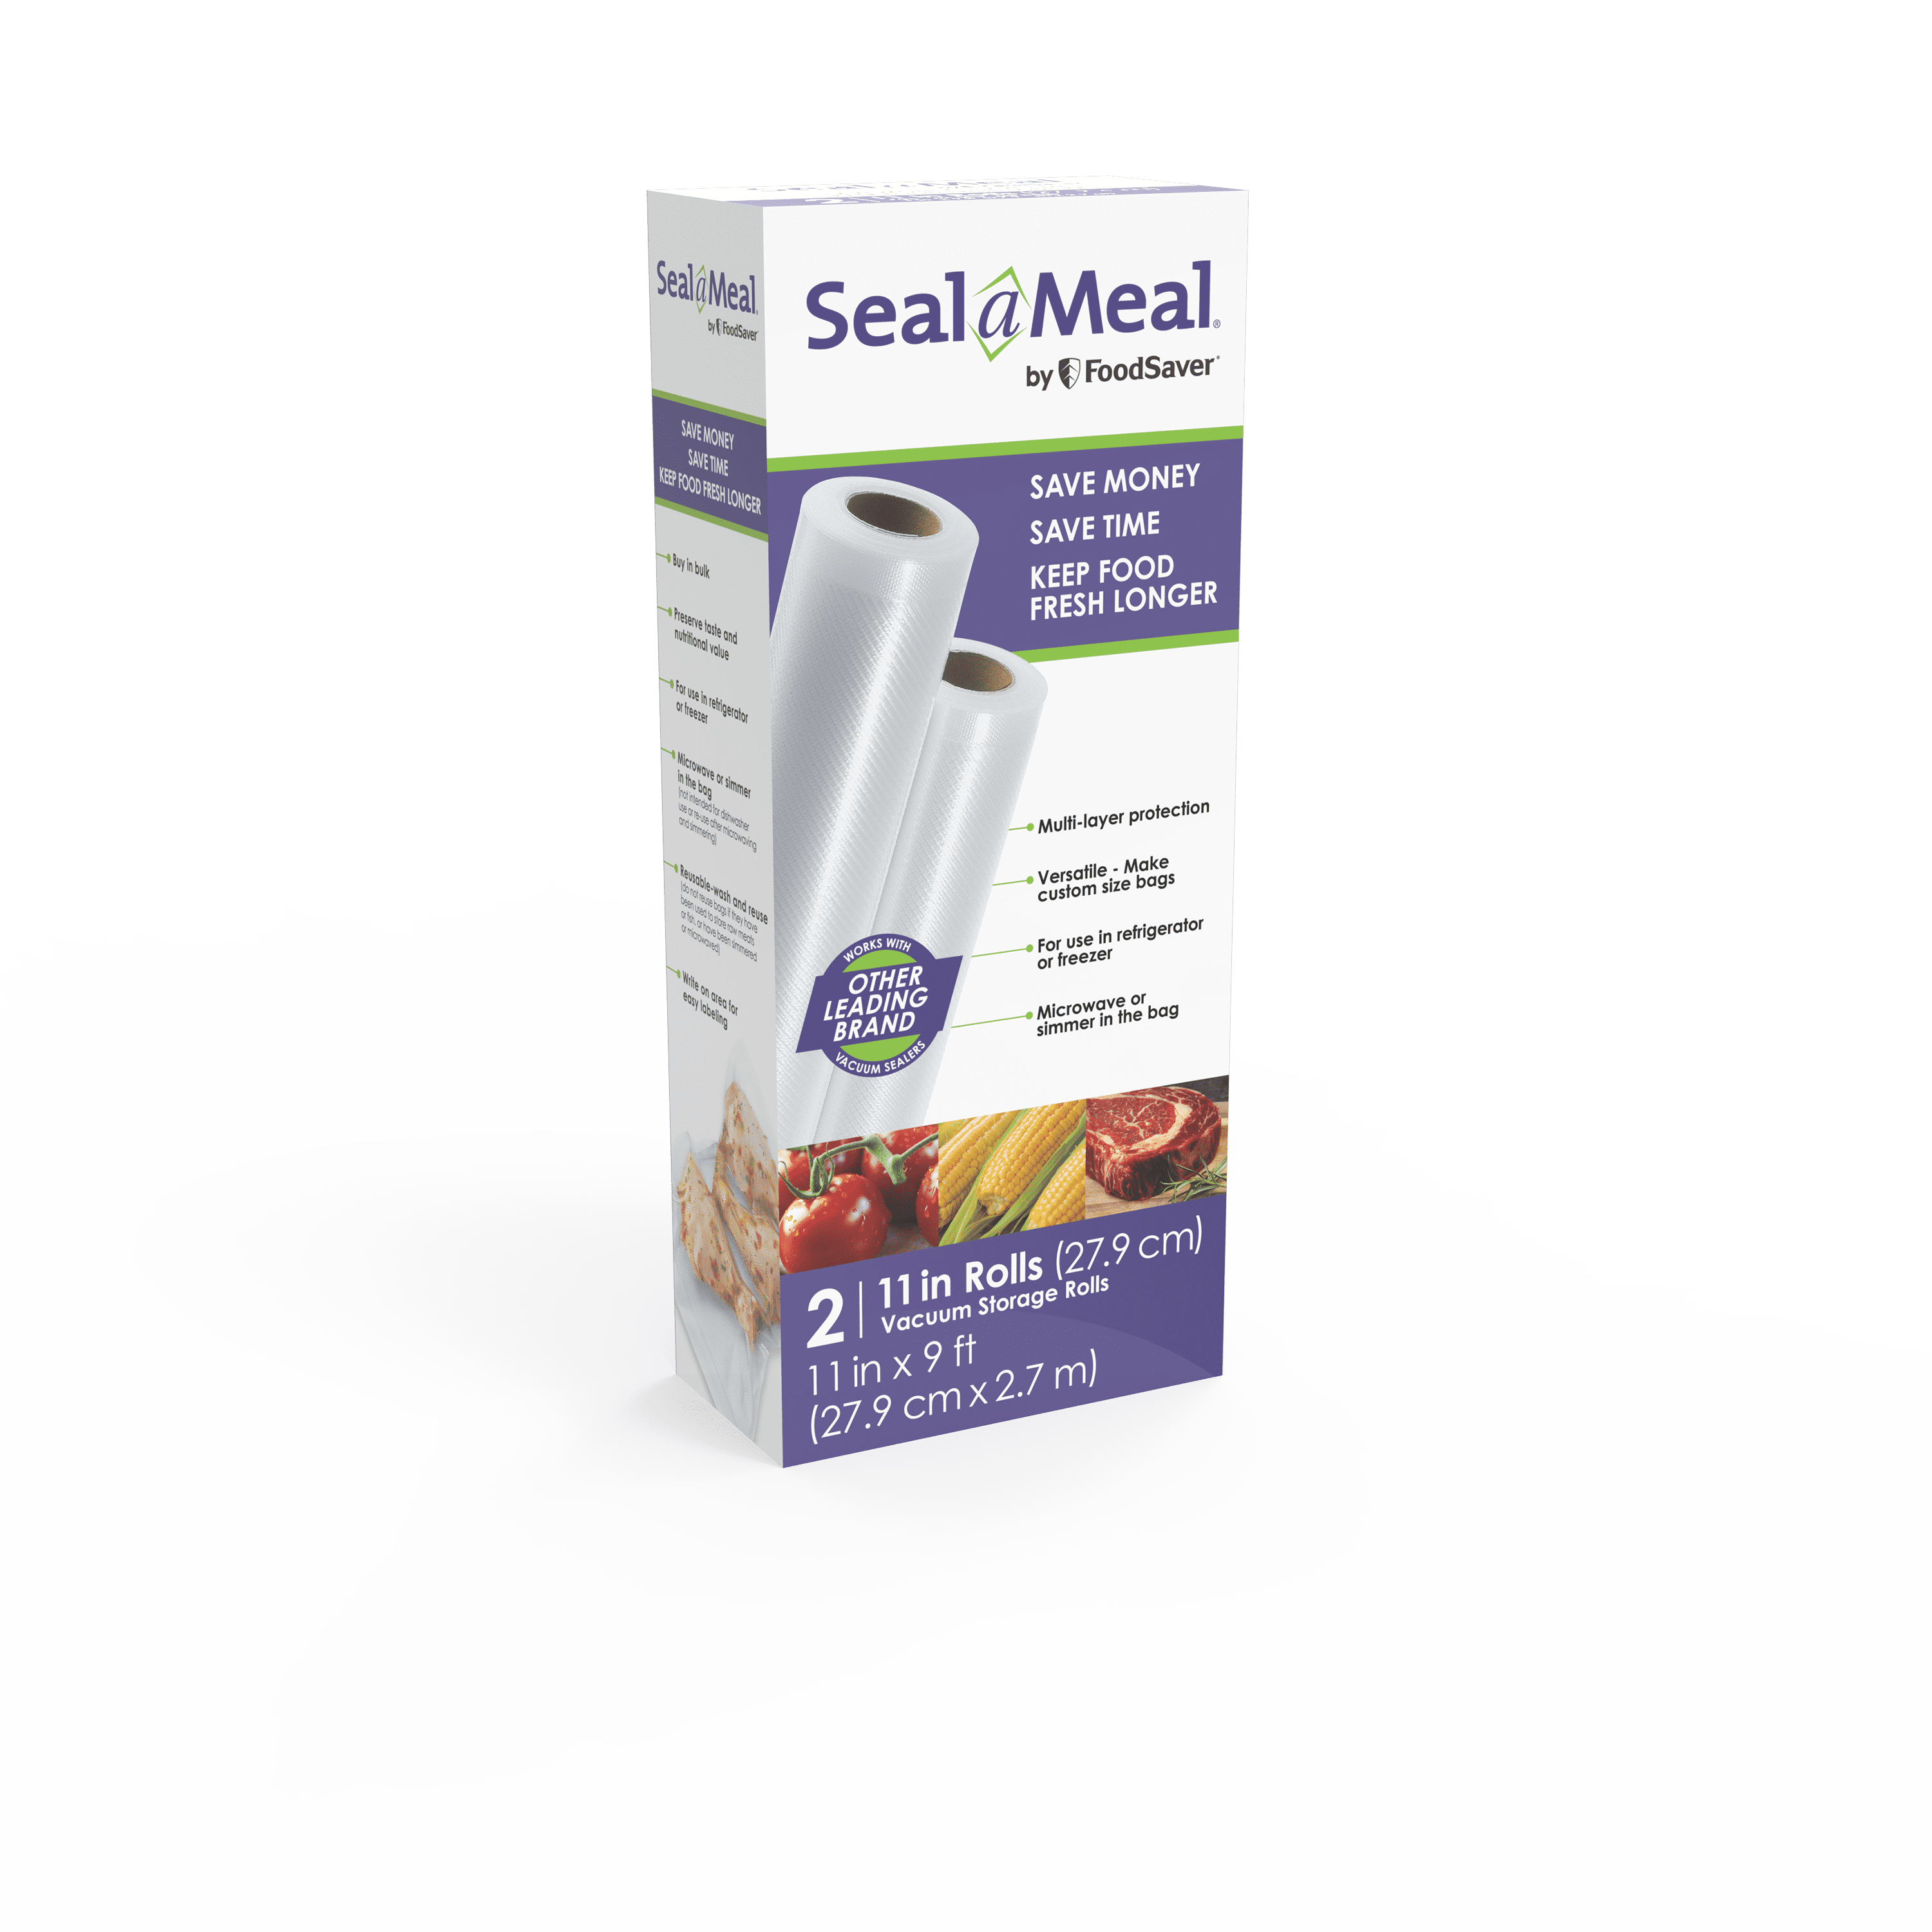 Seal-a-meal 11 x 9' Rolls - 2 ct